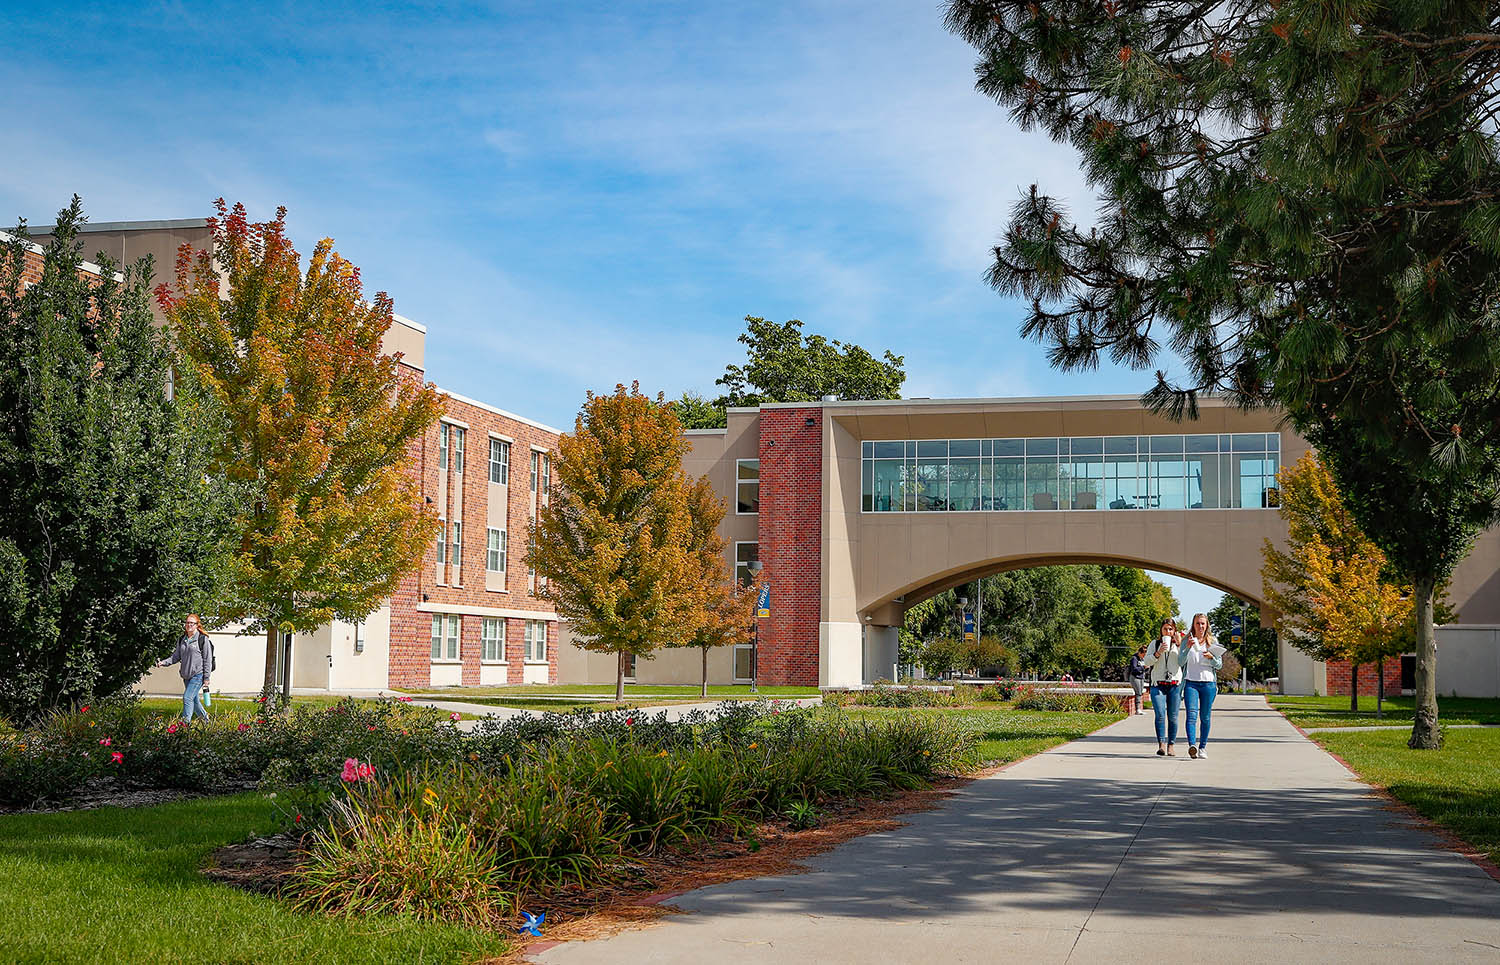 William Nester, the first chancellor of UNK, led the school’s transition into the University of Nebraska system in 1991. Nester Hall is named in his honor, with the University View elevated walkway and lounge representing his vision for the campus.